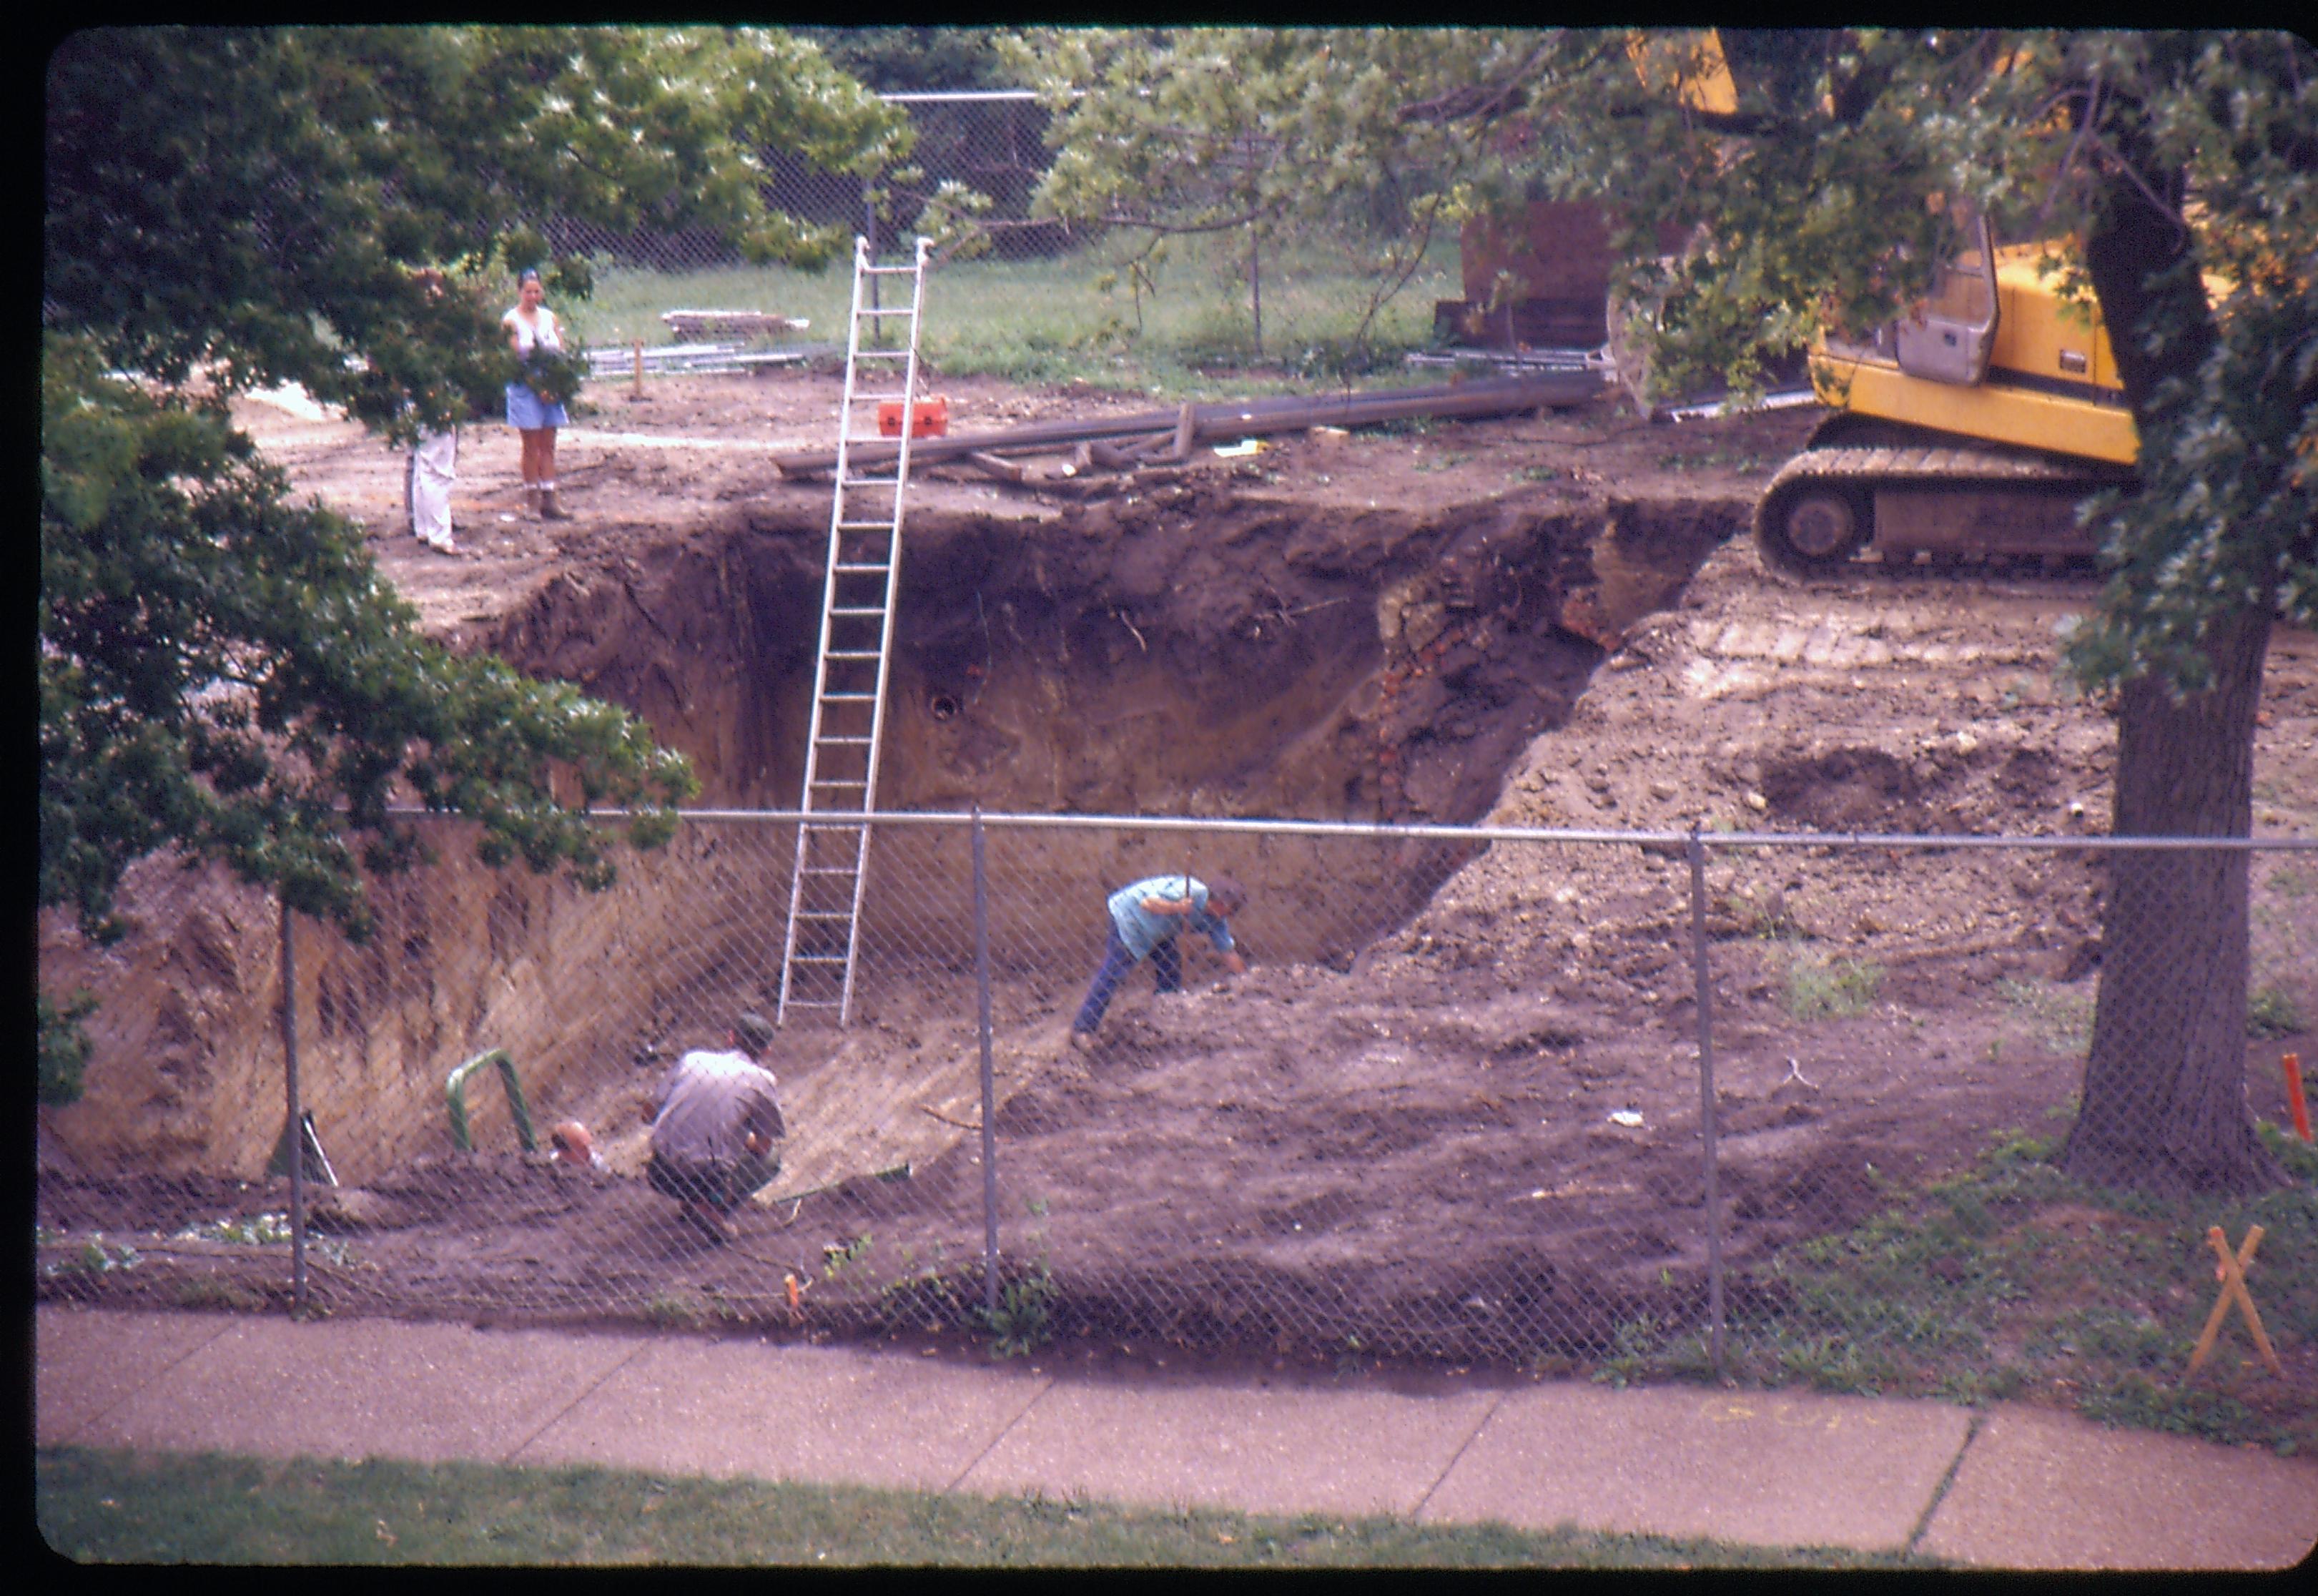 Morse - basement excavation. Fever River Archeologist Floyd Mansberger excavates top of the cistern (not visible) while Maintenance workers Al McHenry and Doug Sharp wait and Fever River staffer takes pictures while talking to Historian Tim Townsend and Curator Susan Haake in left background behind tree. Looking South from top of parking garage across Capitol Ave. Morse, foundation, archeology, staff, Fever River, parking garage, Capitol Ave.